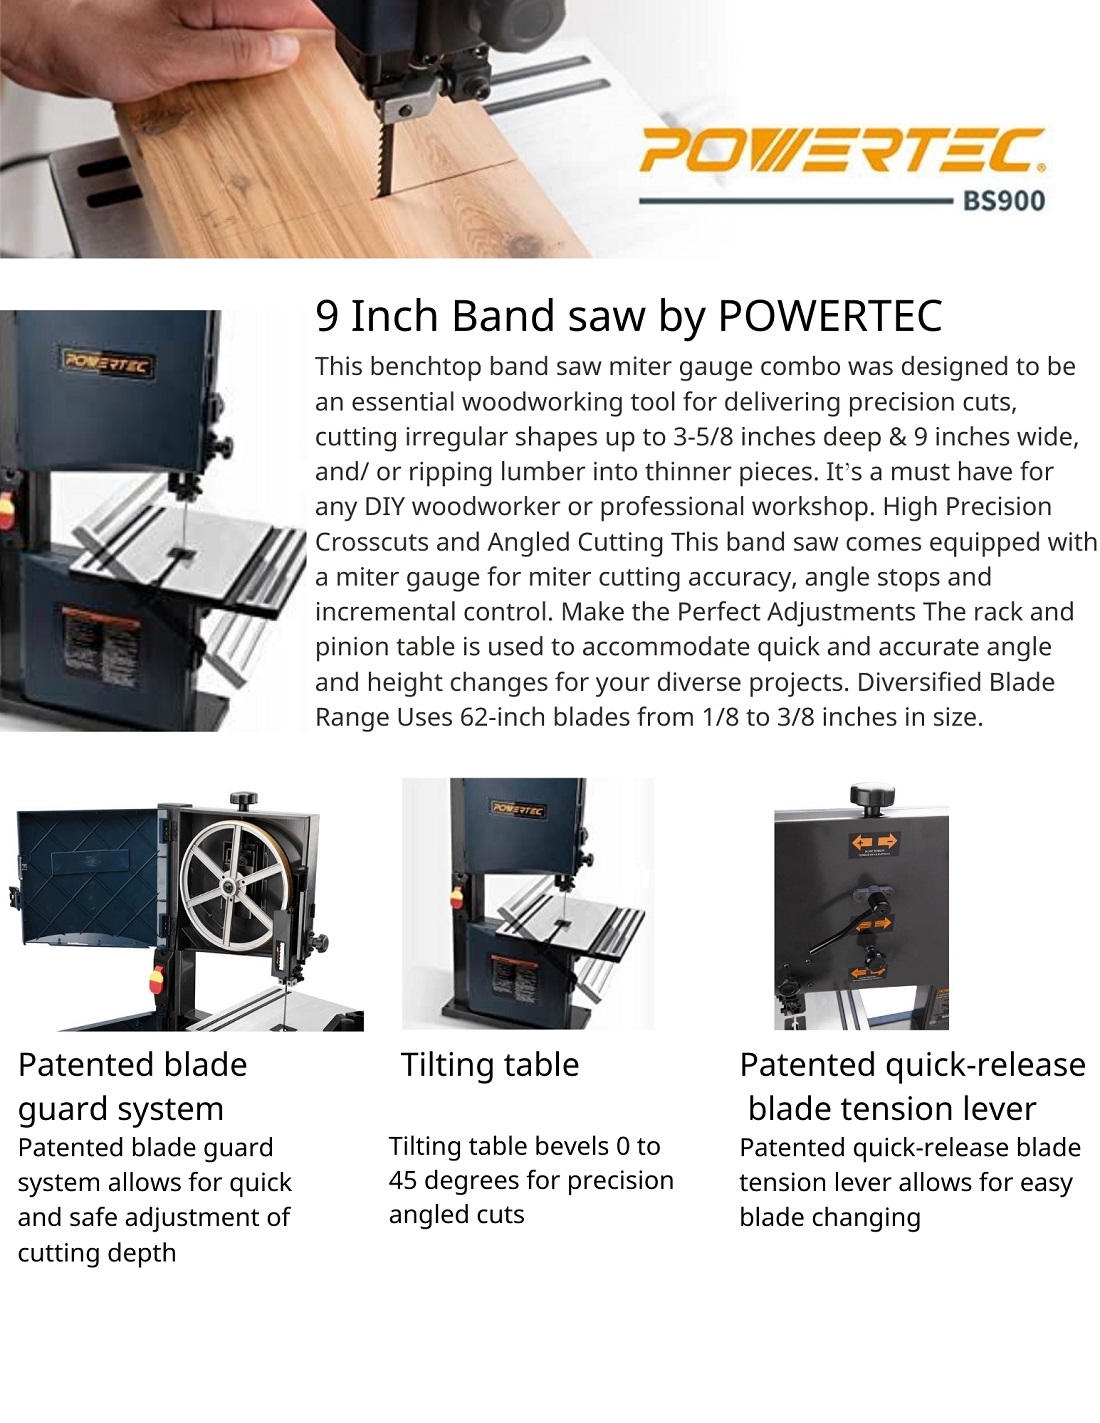 POWERTEC BS900 Benchtop Band Saw